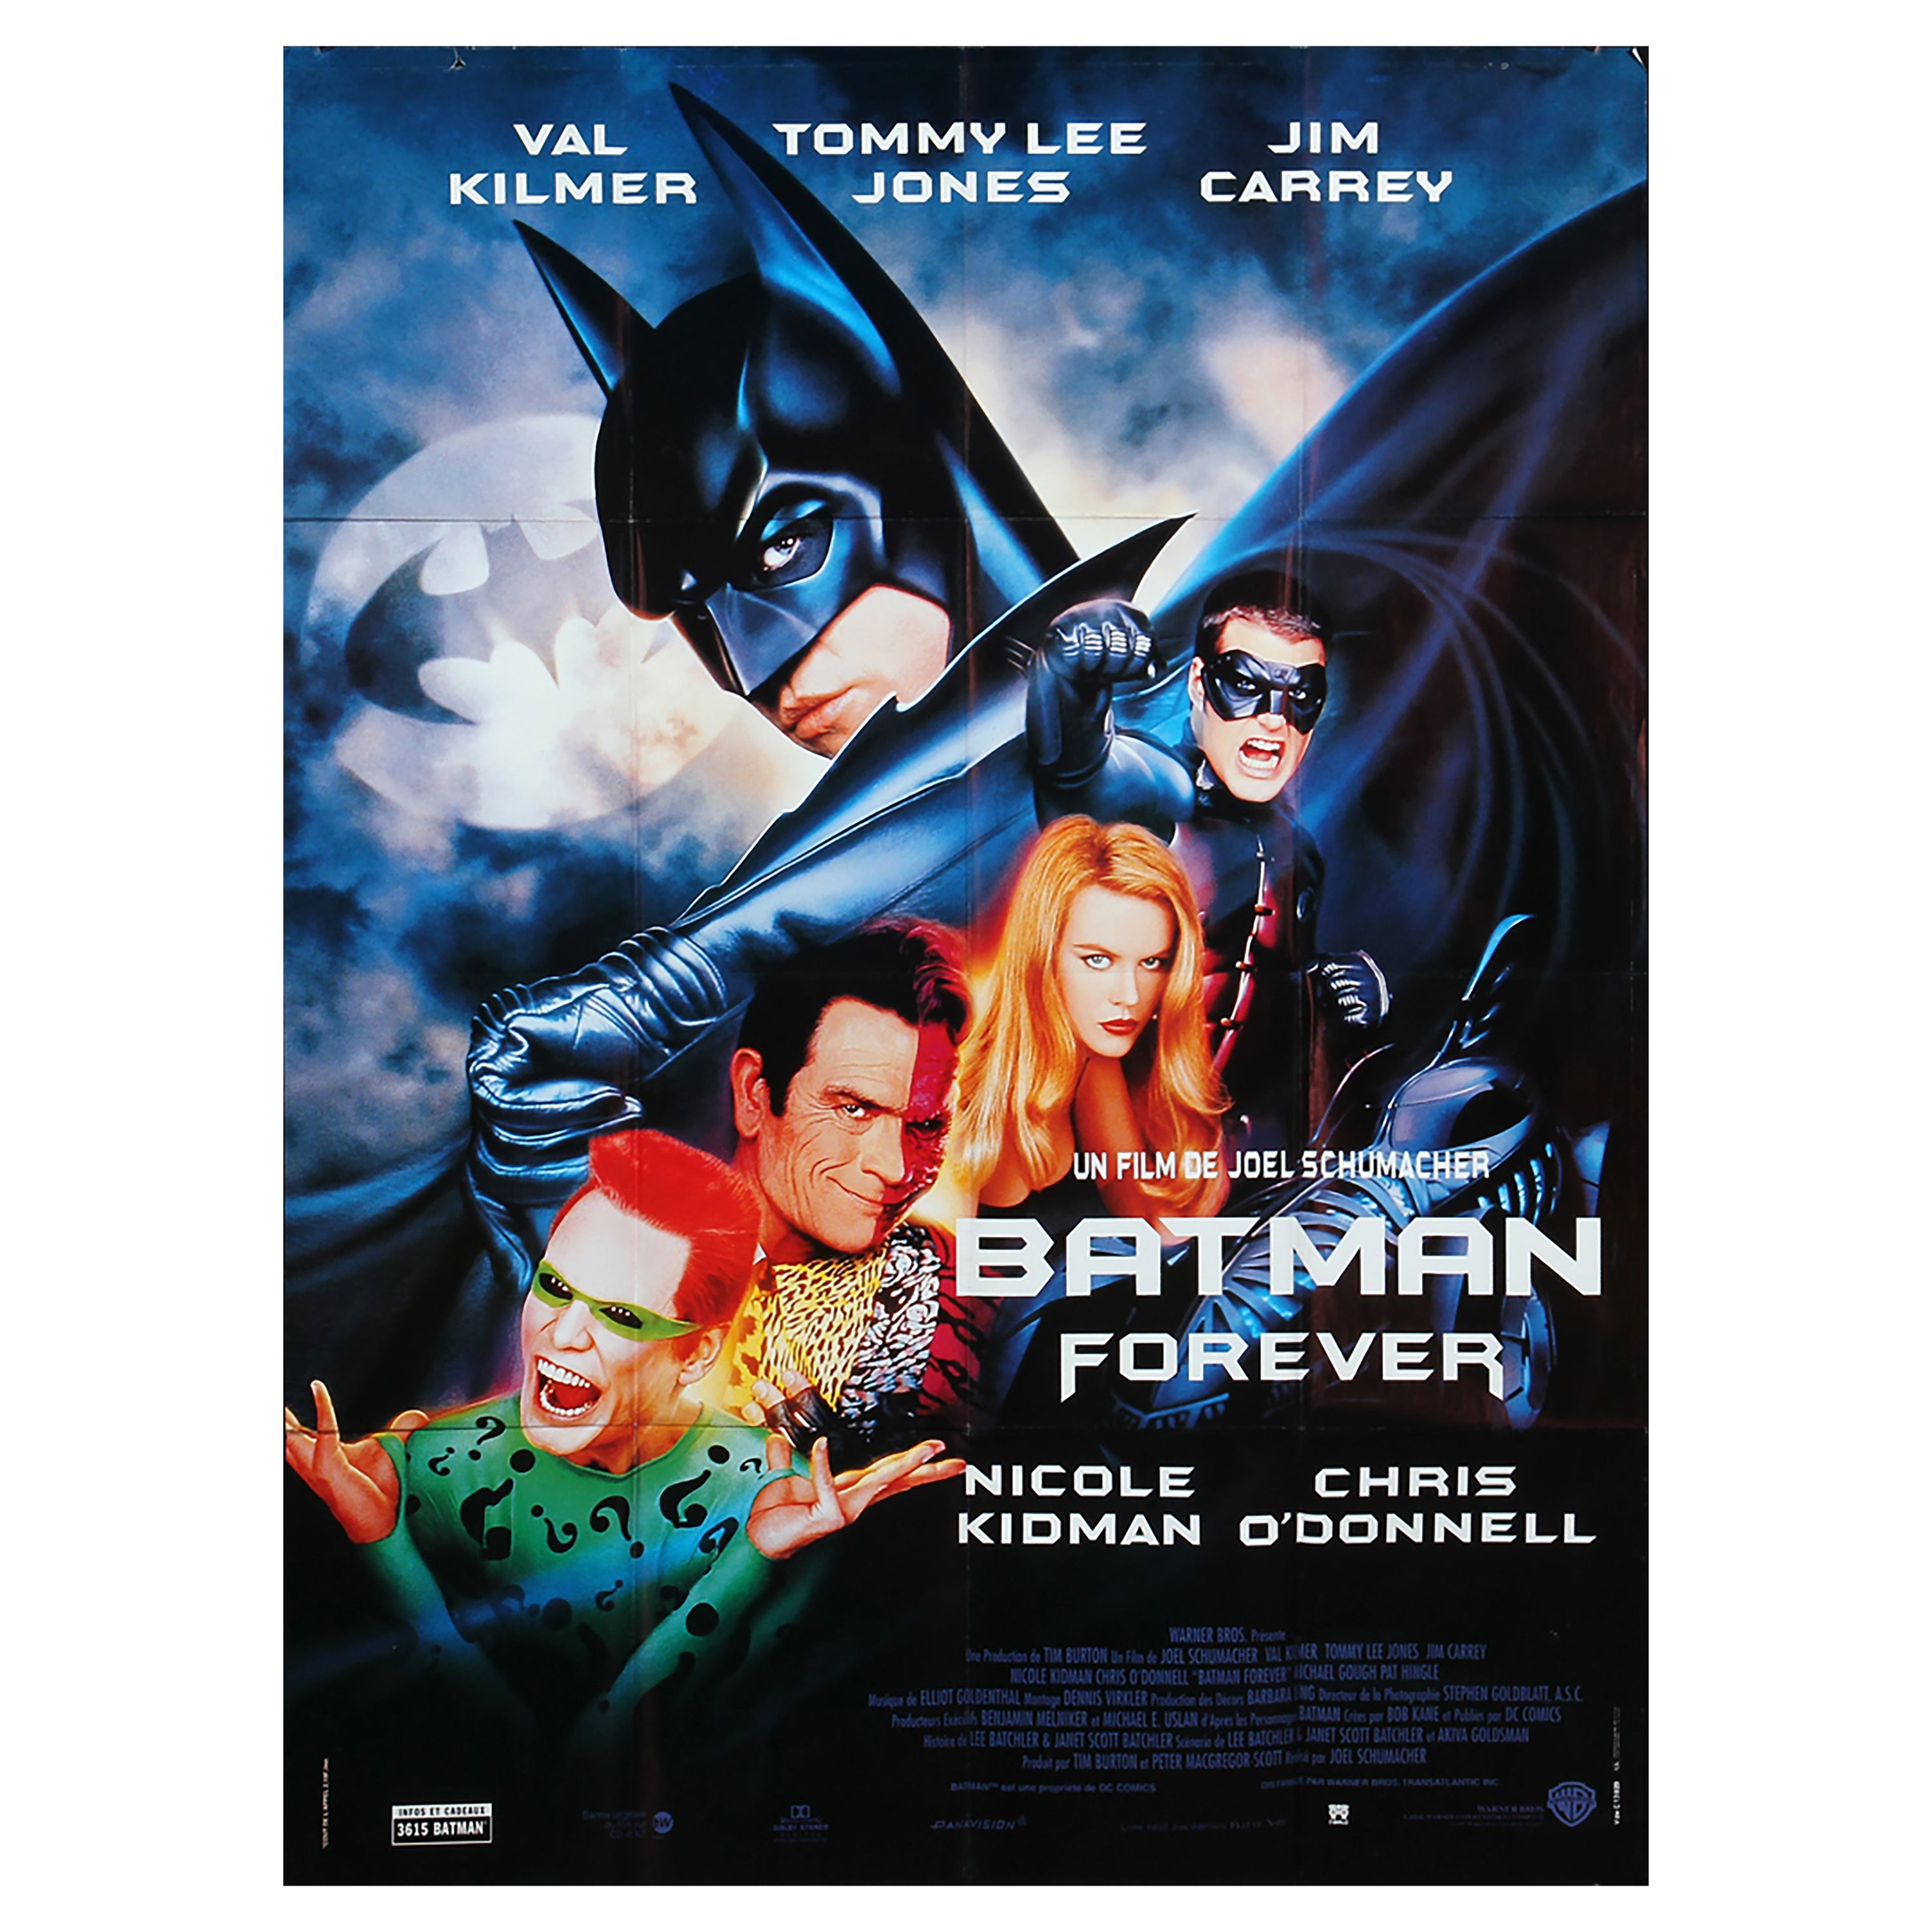 Film Poster "Batman Forever" from 1995 For Sale